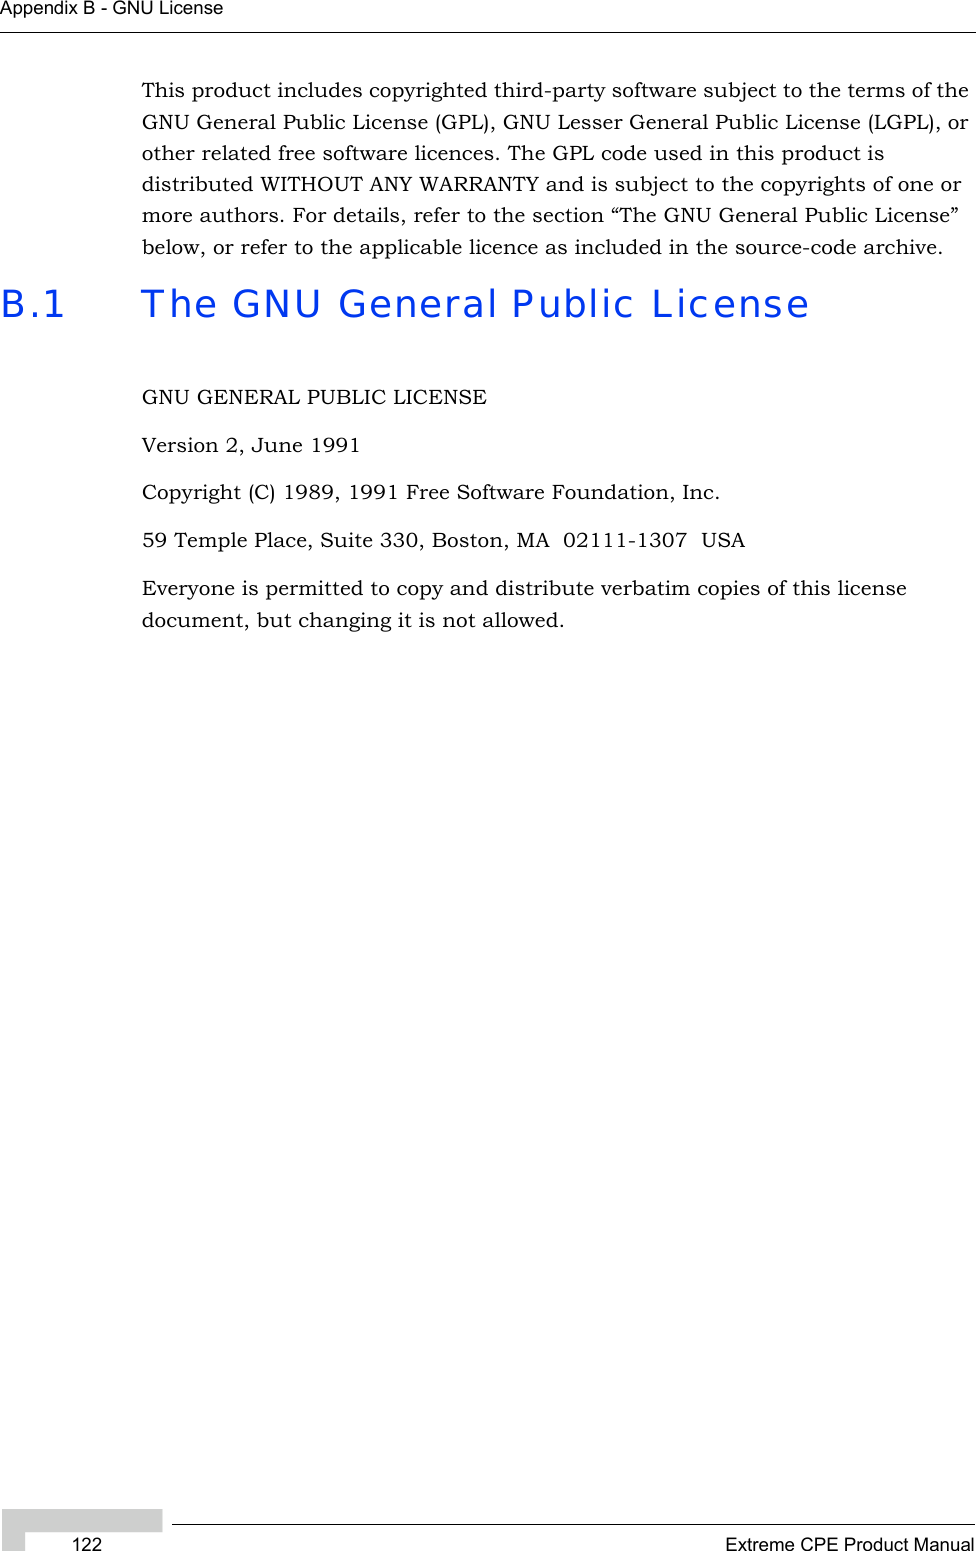 122 Extreme CPE Product ManualAppendix B - GNU LicenseThis product includes copyrighted third-party software subject to the terms of the GNU General Public License (GPL), GNU Lesser General Public License (LGPL), or other related free software licences. The GPL code used in this product is distributed WITHOUT ANY WARRANTY and is subject to the copyrights of one or more authors. For details, refer to the section “The GNU General Public License” below, or refer to the applicable licence as included in the source-code archive.B.1 The GNU General Public LicenseGNU GENERAL PUBLIC LICENSEVersion 2, June 1991Copyright (C) 1989, 1991 Free Software Foundation, Inc.59 Temple Place, Suite 330, Boston, MA  02111-1307  USAEveryone is permitted to copy and distribute verbatim copies of this license document, but changing it is not allowed.